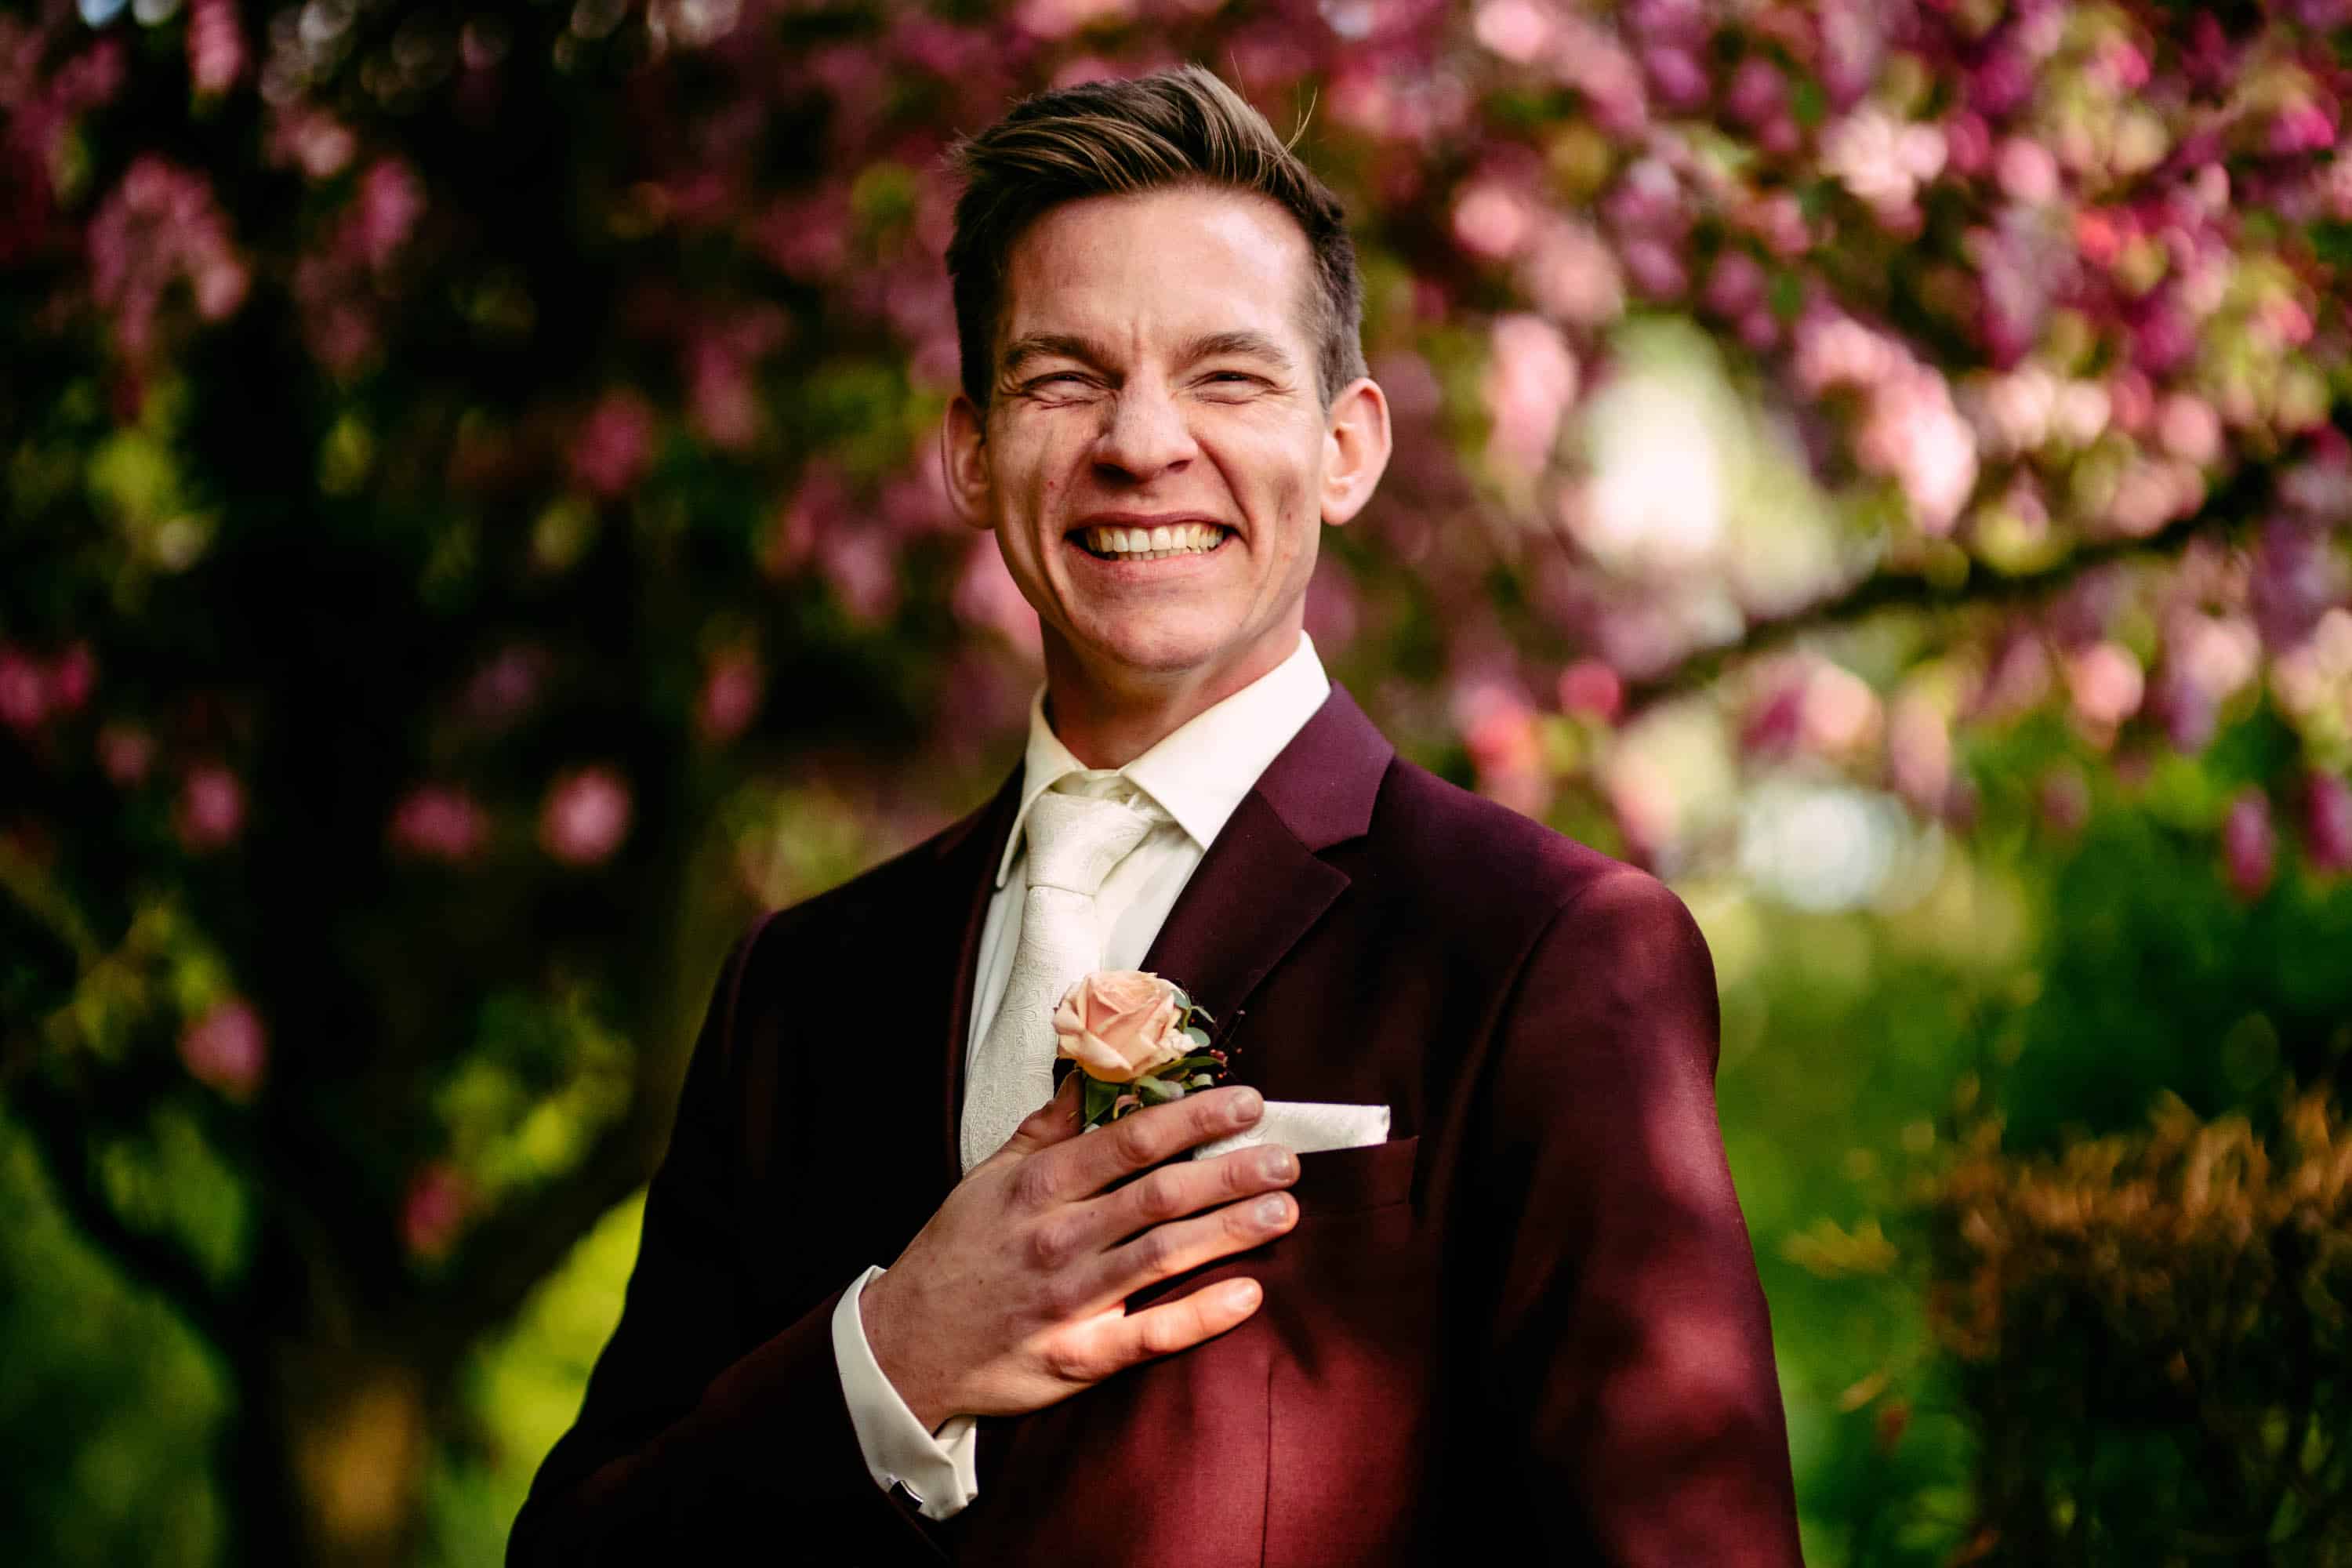 A man in a suit smiles in front of a flowering tree.